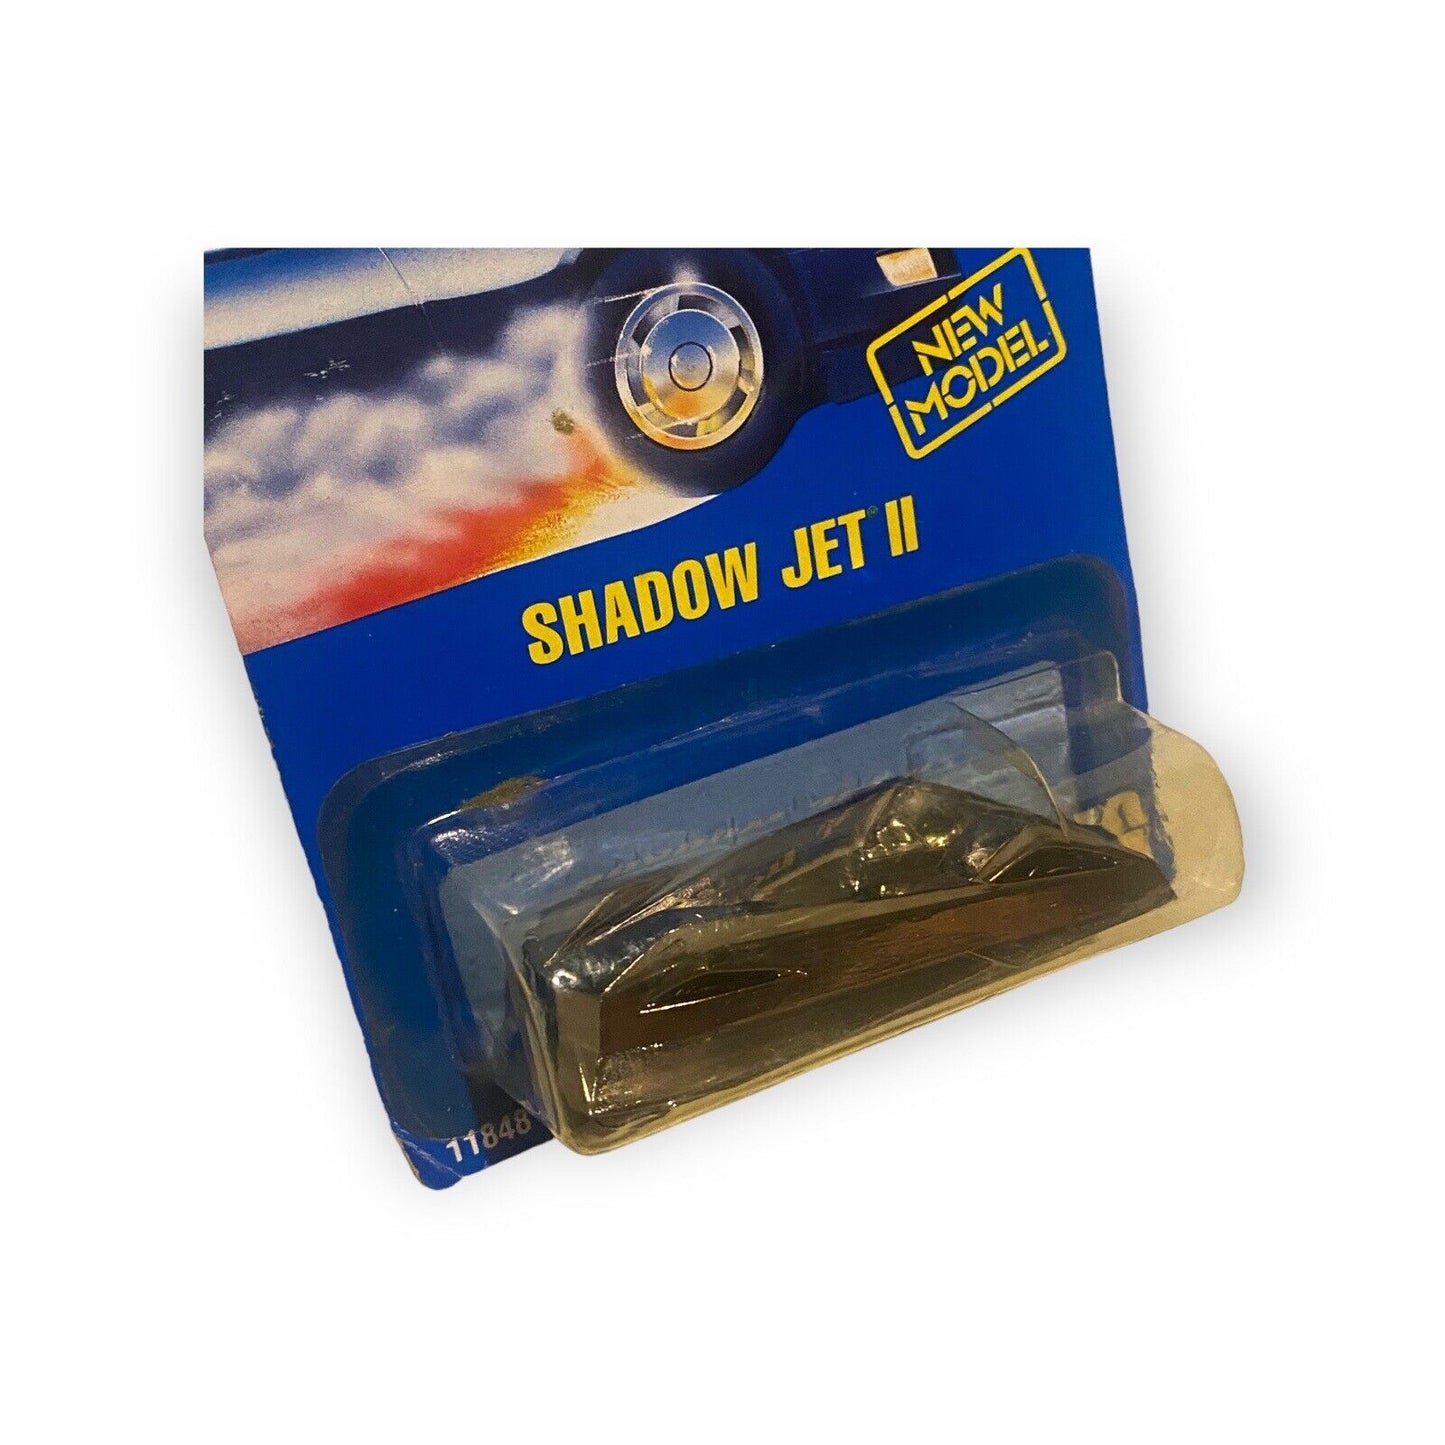 Hot Wheels Shadow Jet II New Model Collector Number 246 Chrome Sealed